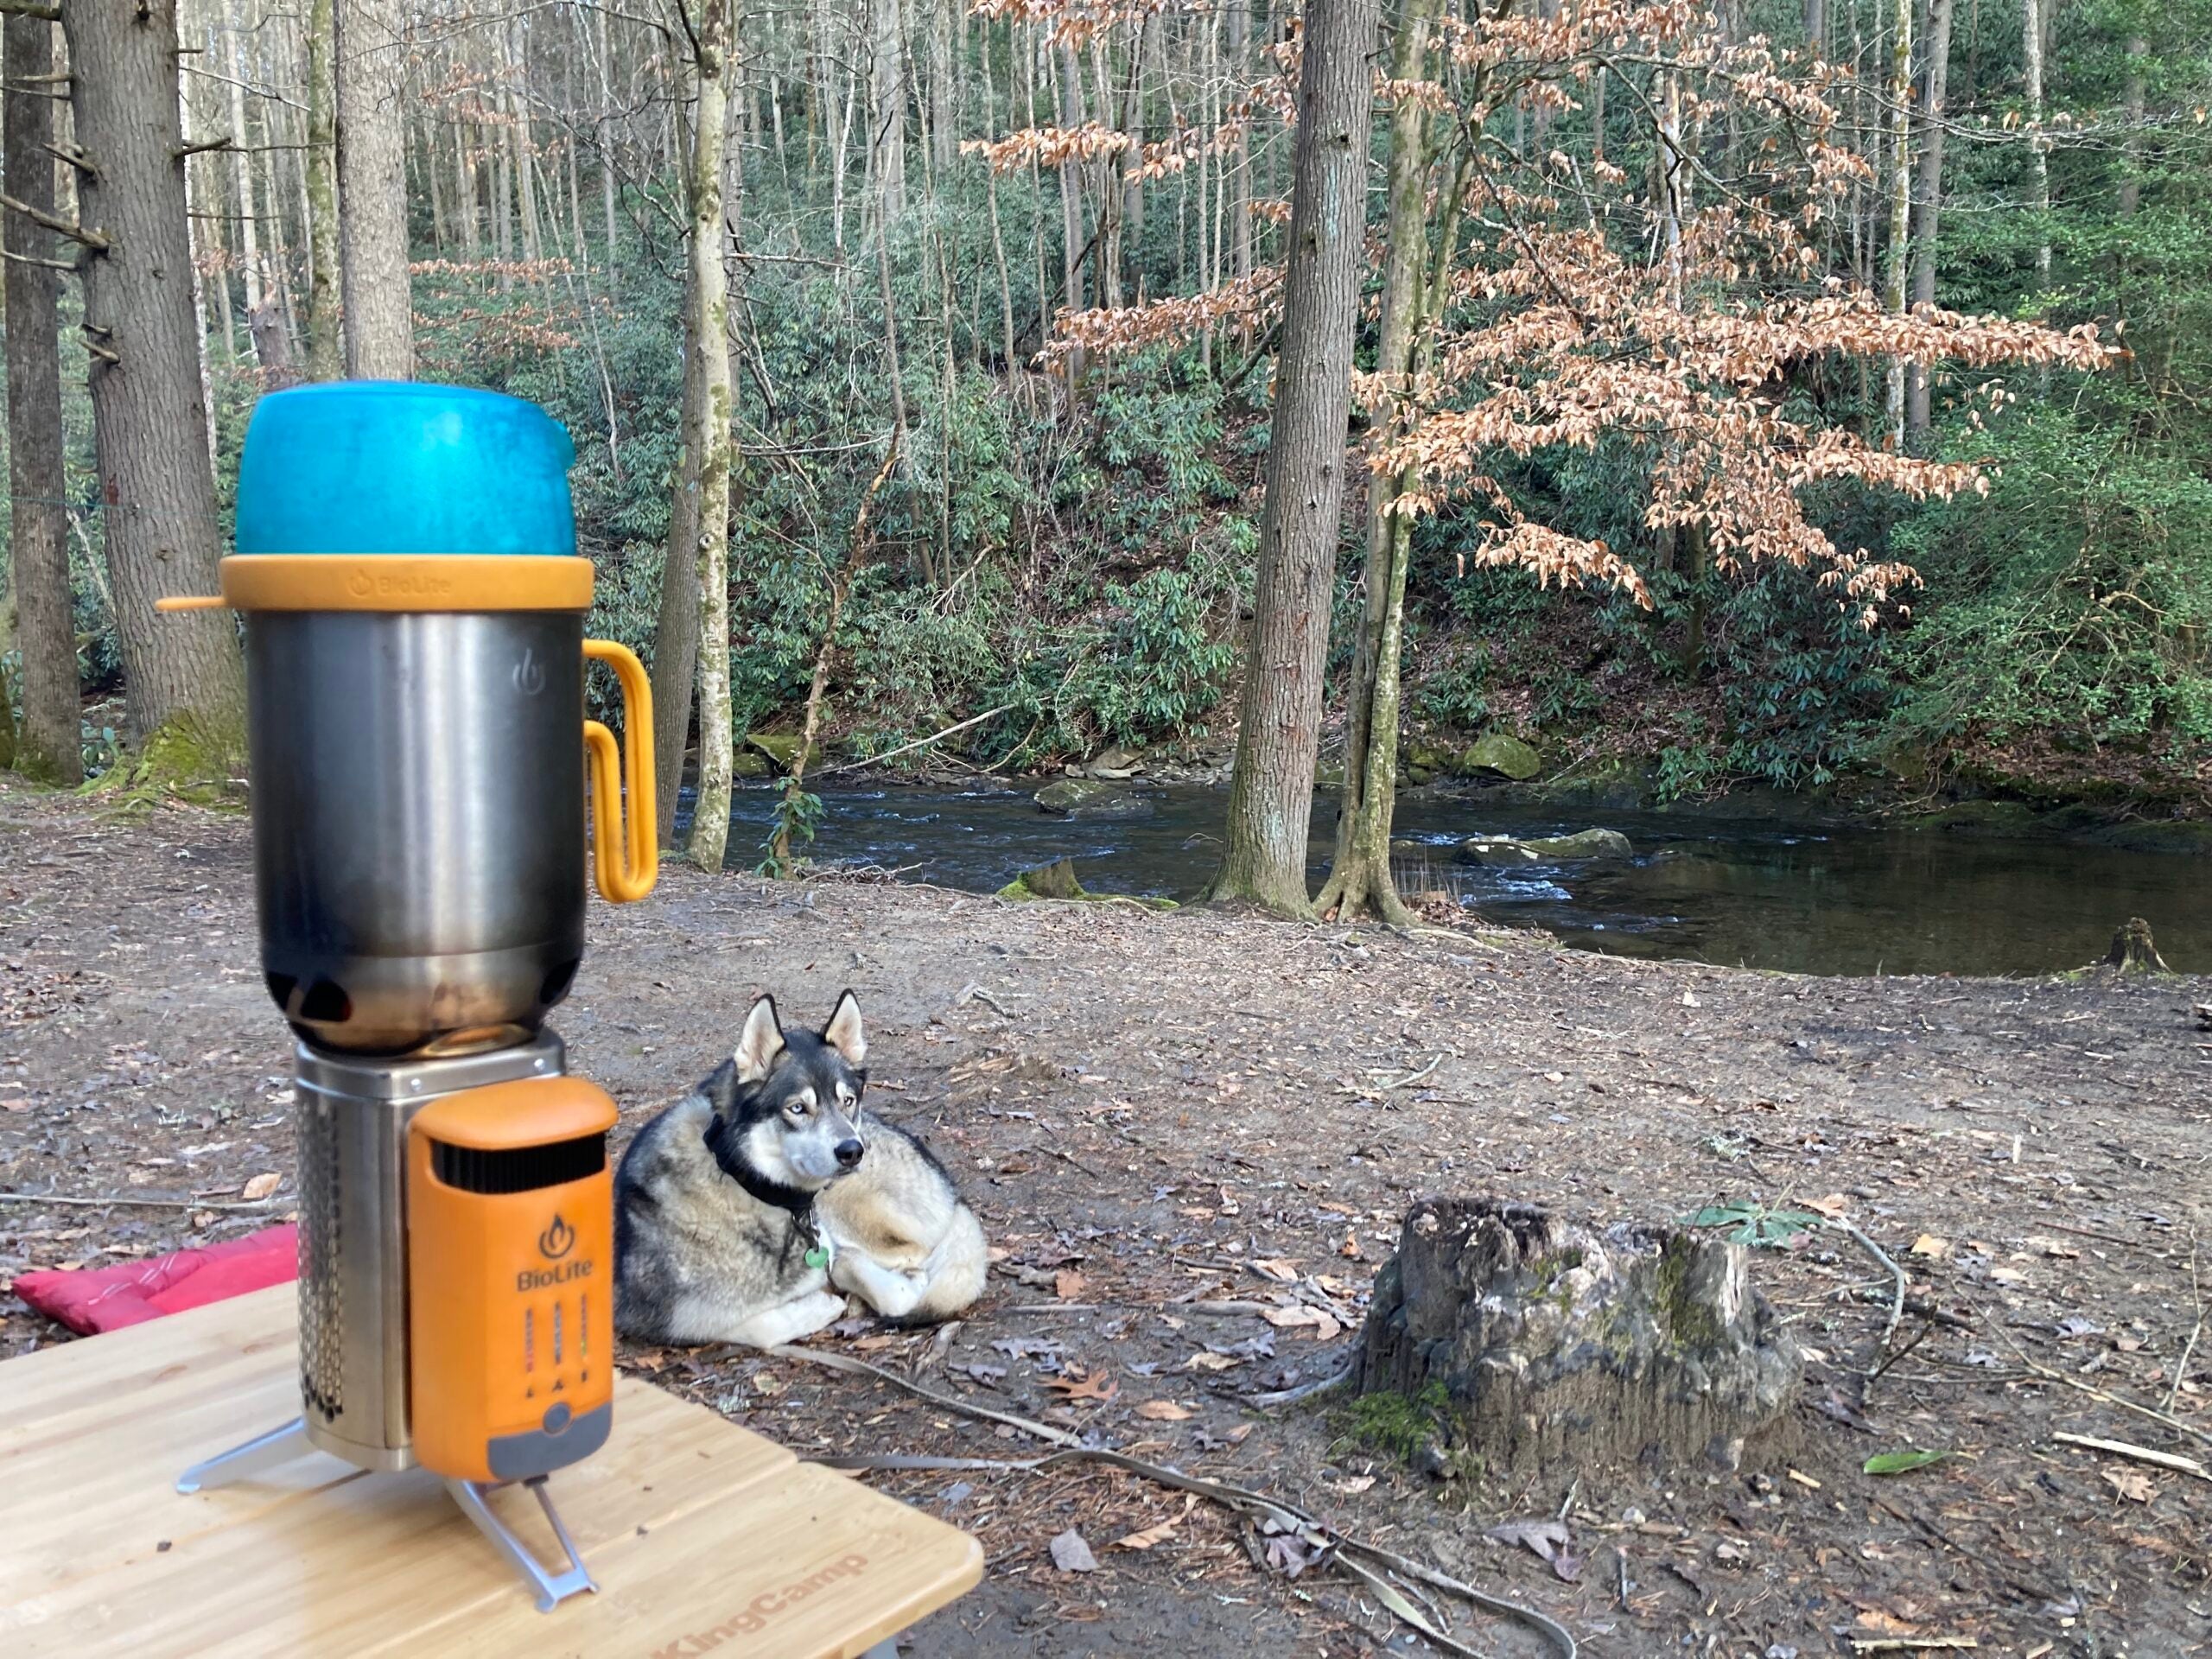 BioLite Camp Stove 2+: Tested and Reviewed